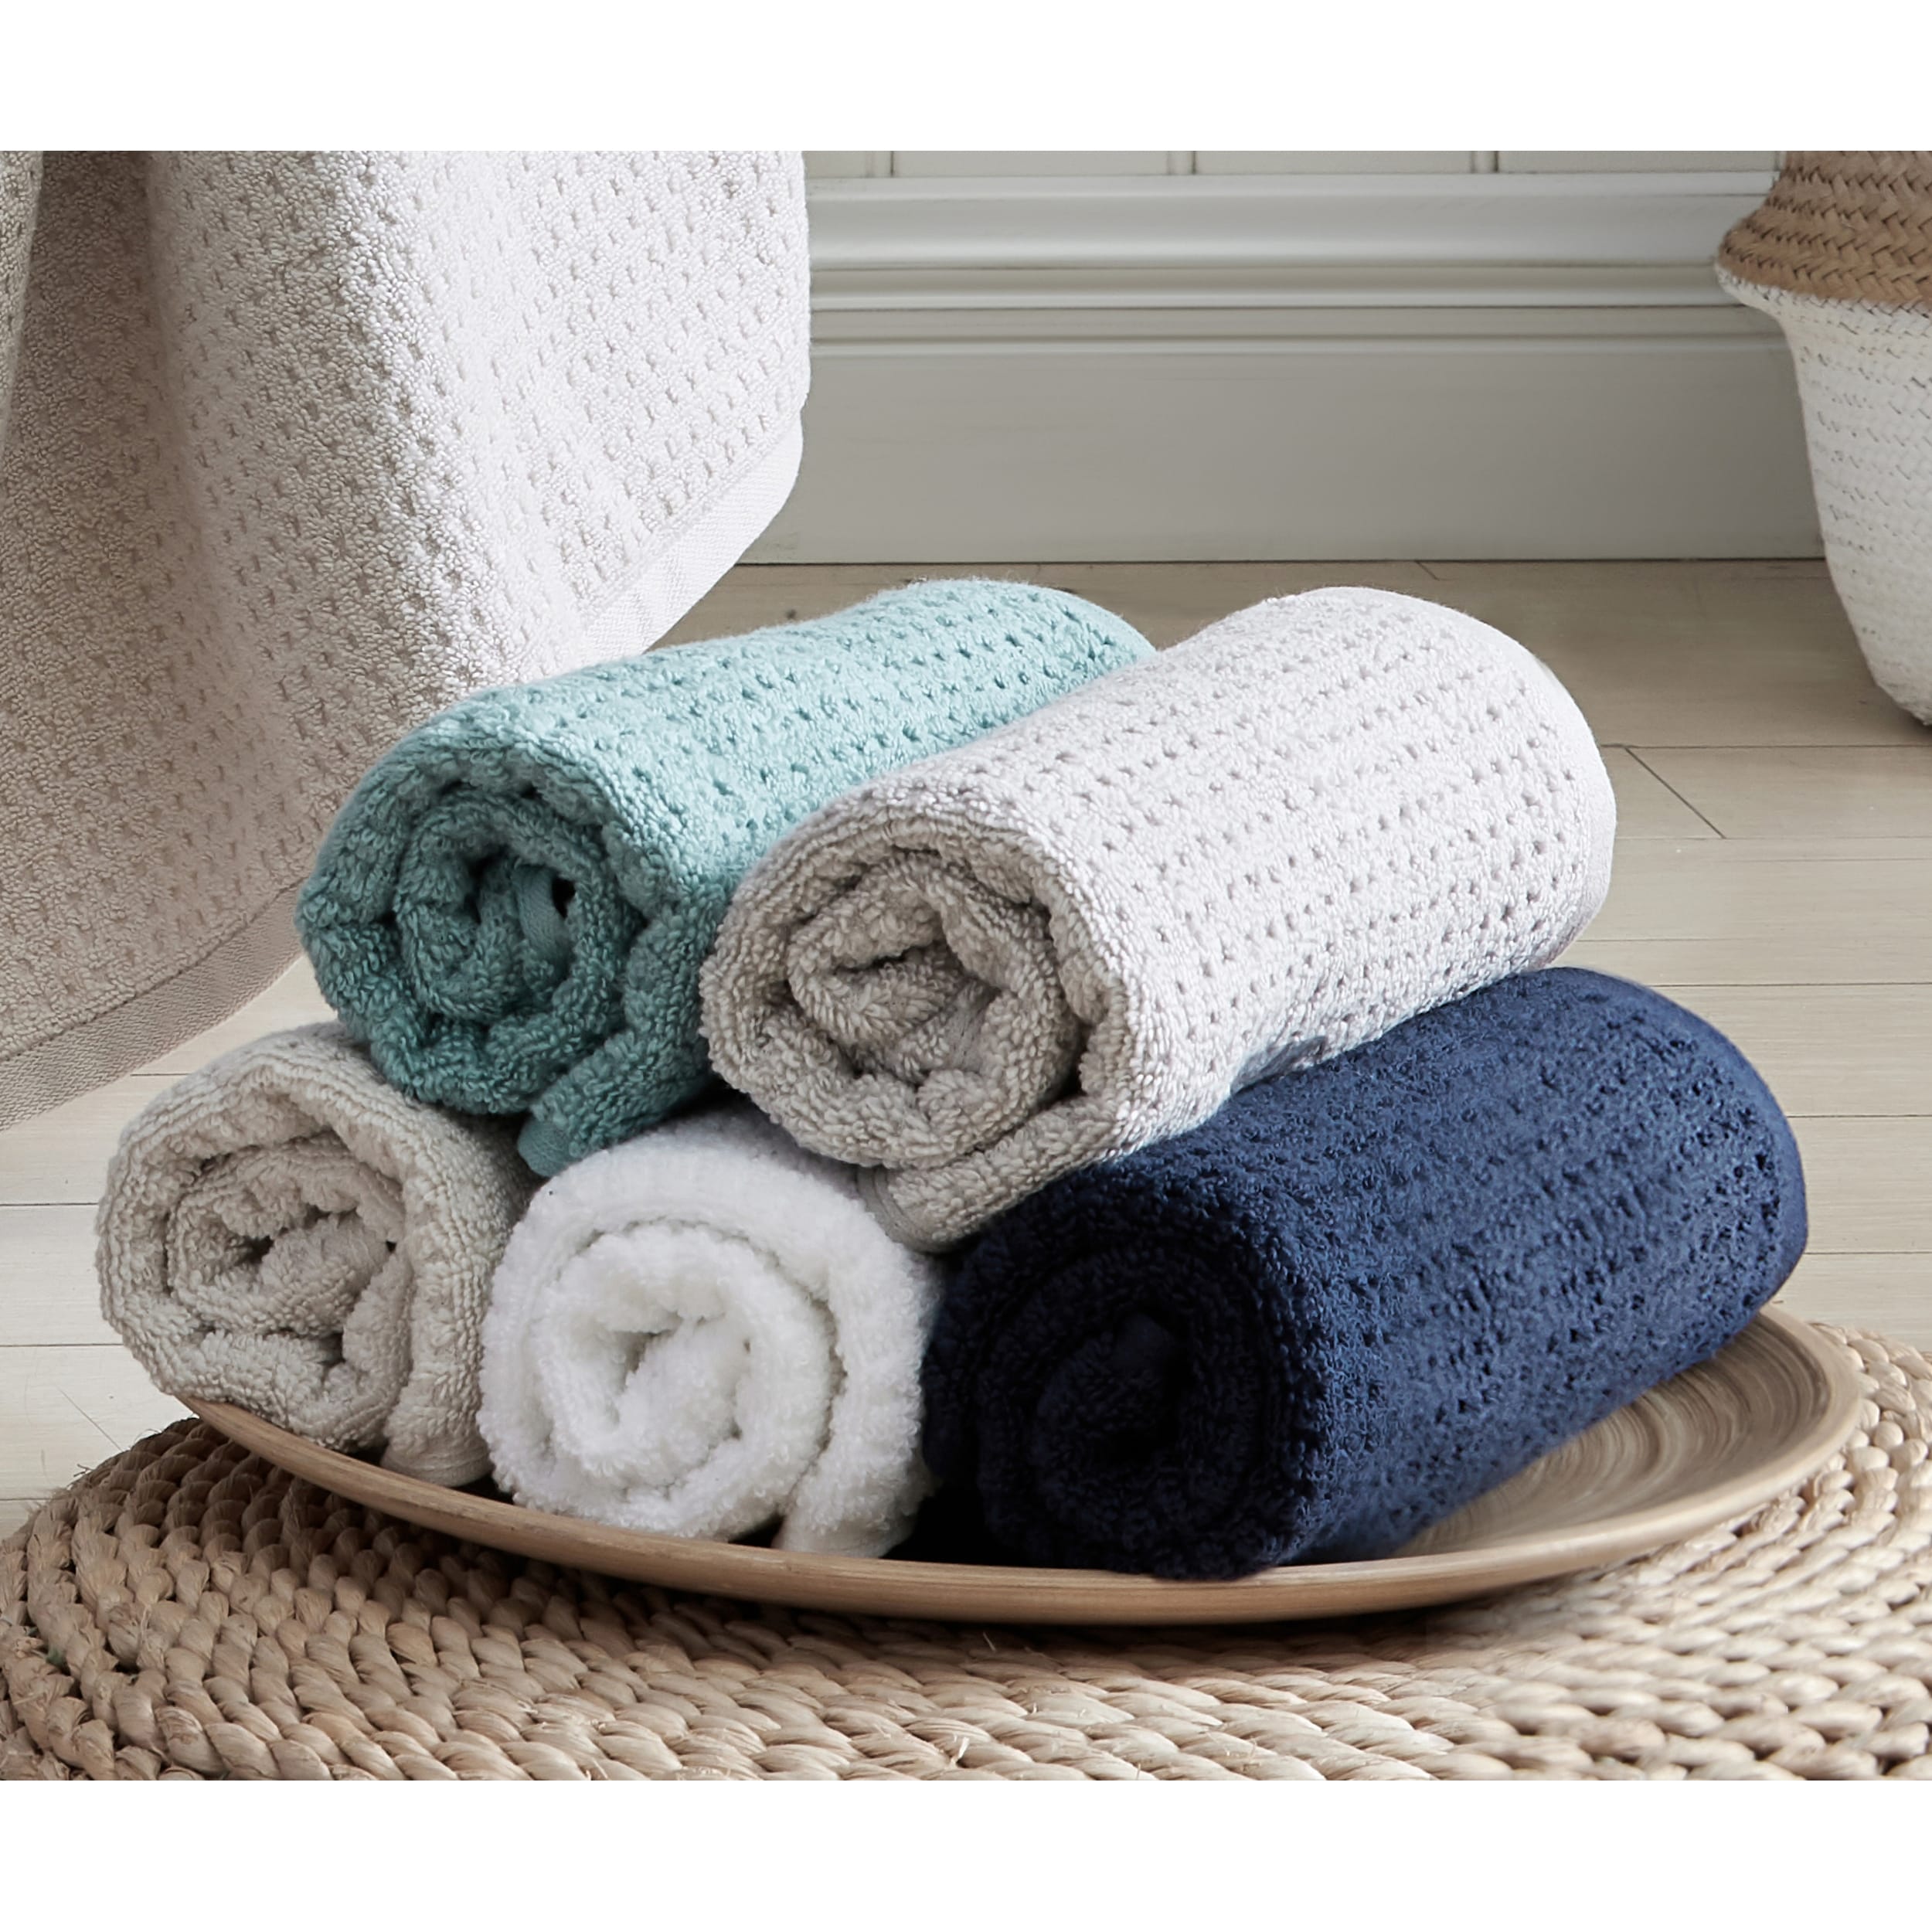 Tommy Bahama Northern Pacific 2-Piece Blue Cotton Hand Towel Set